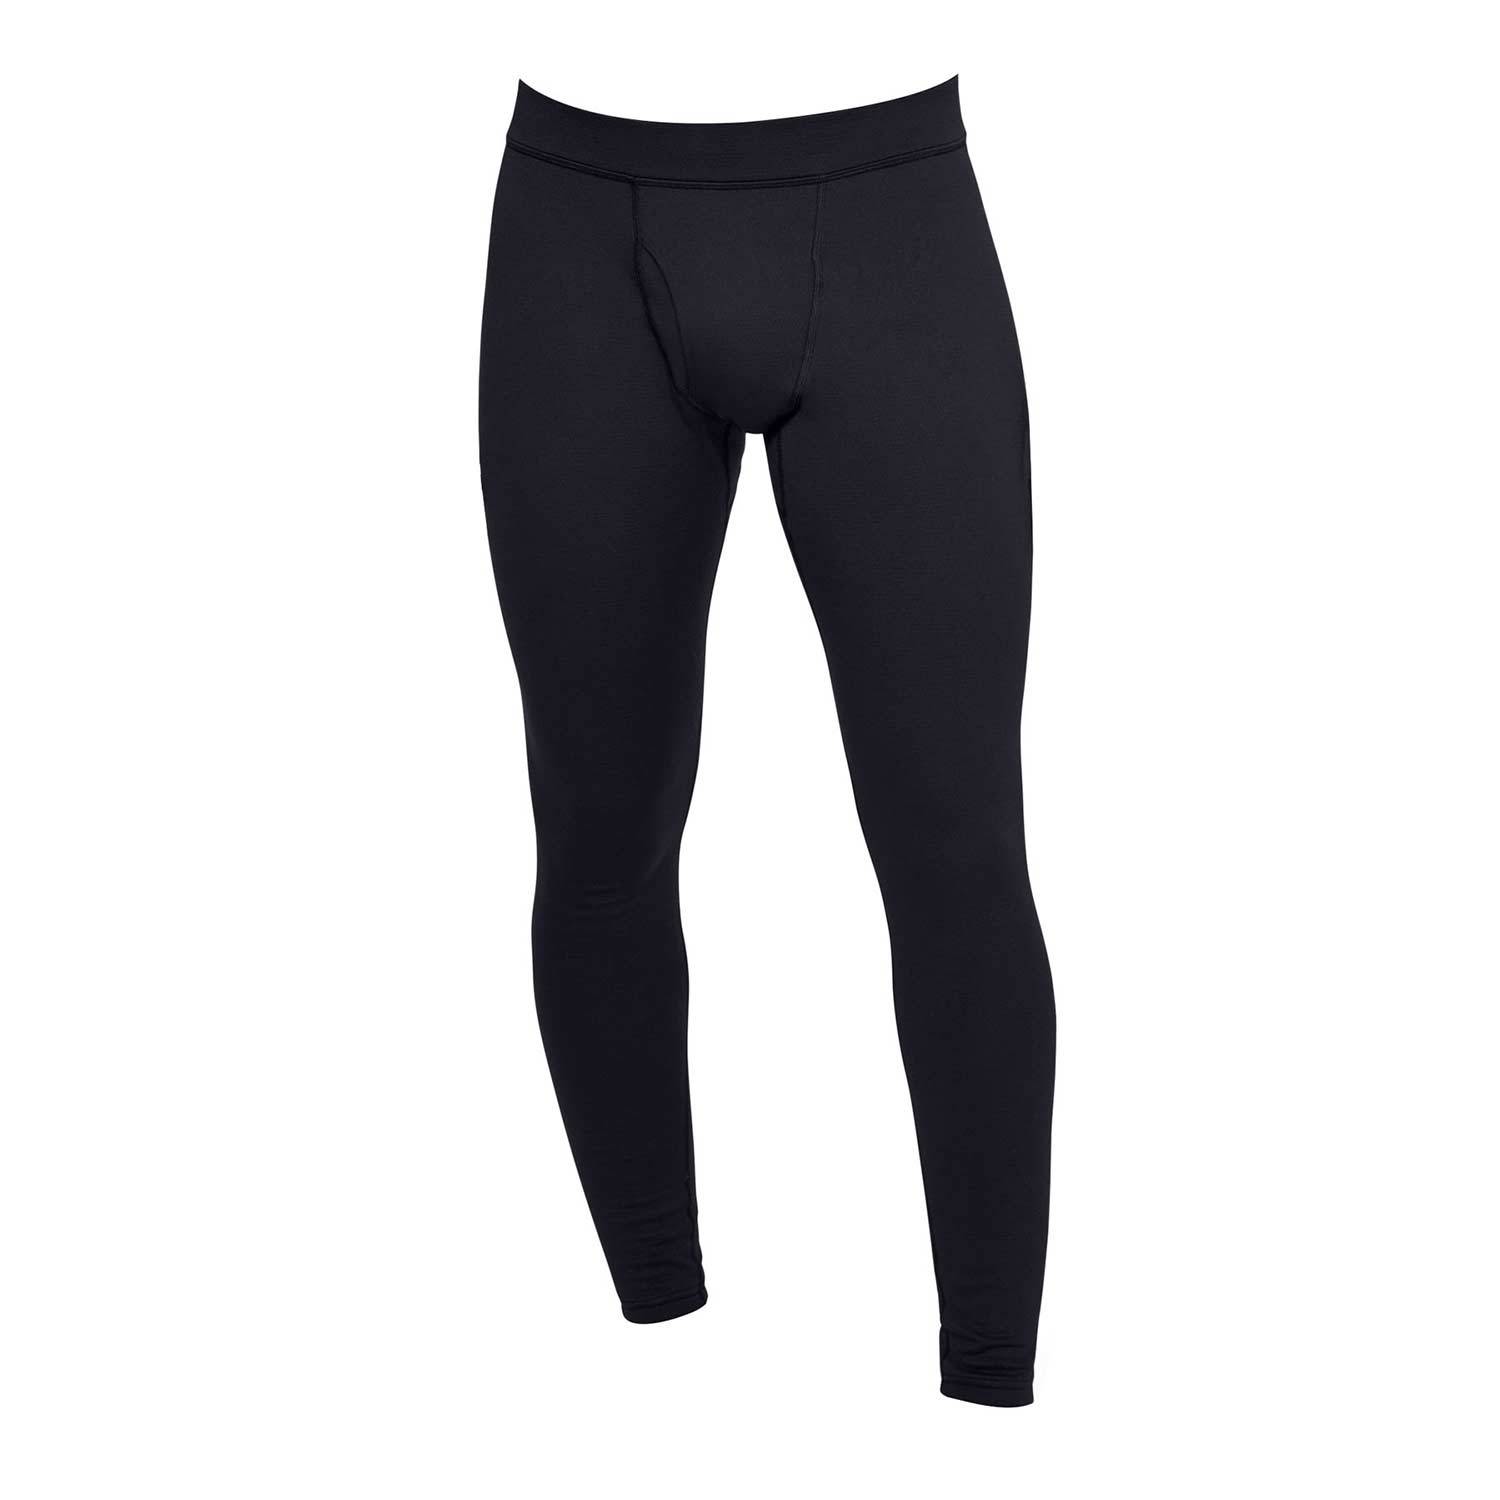 Under Armour, Pants & Jumpsuits, Under Armour Womens Coldgear Compression  Tight Leggings Size Small